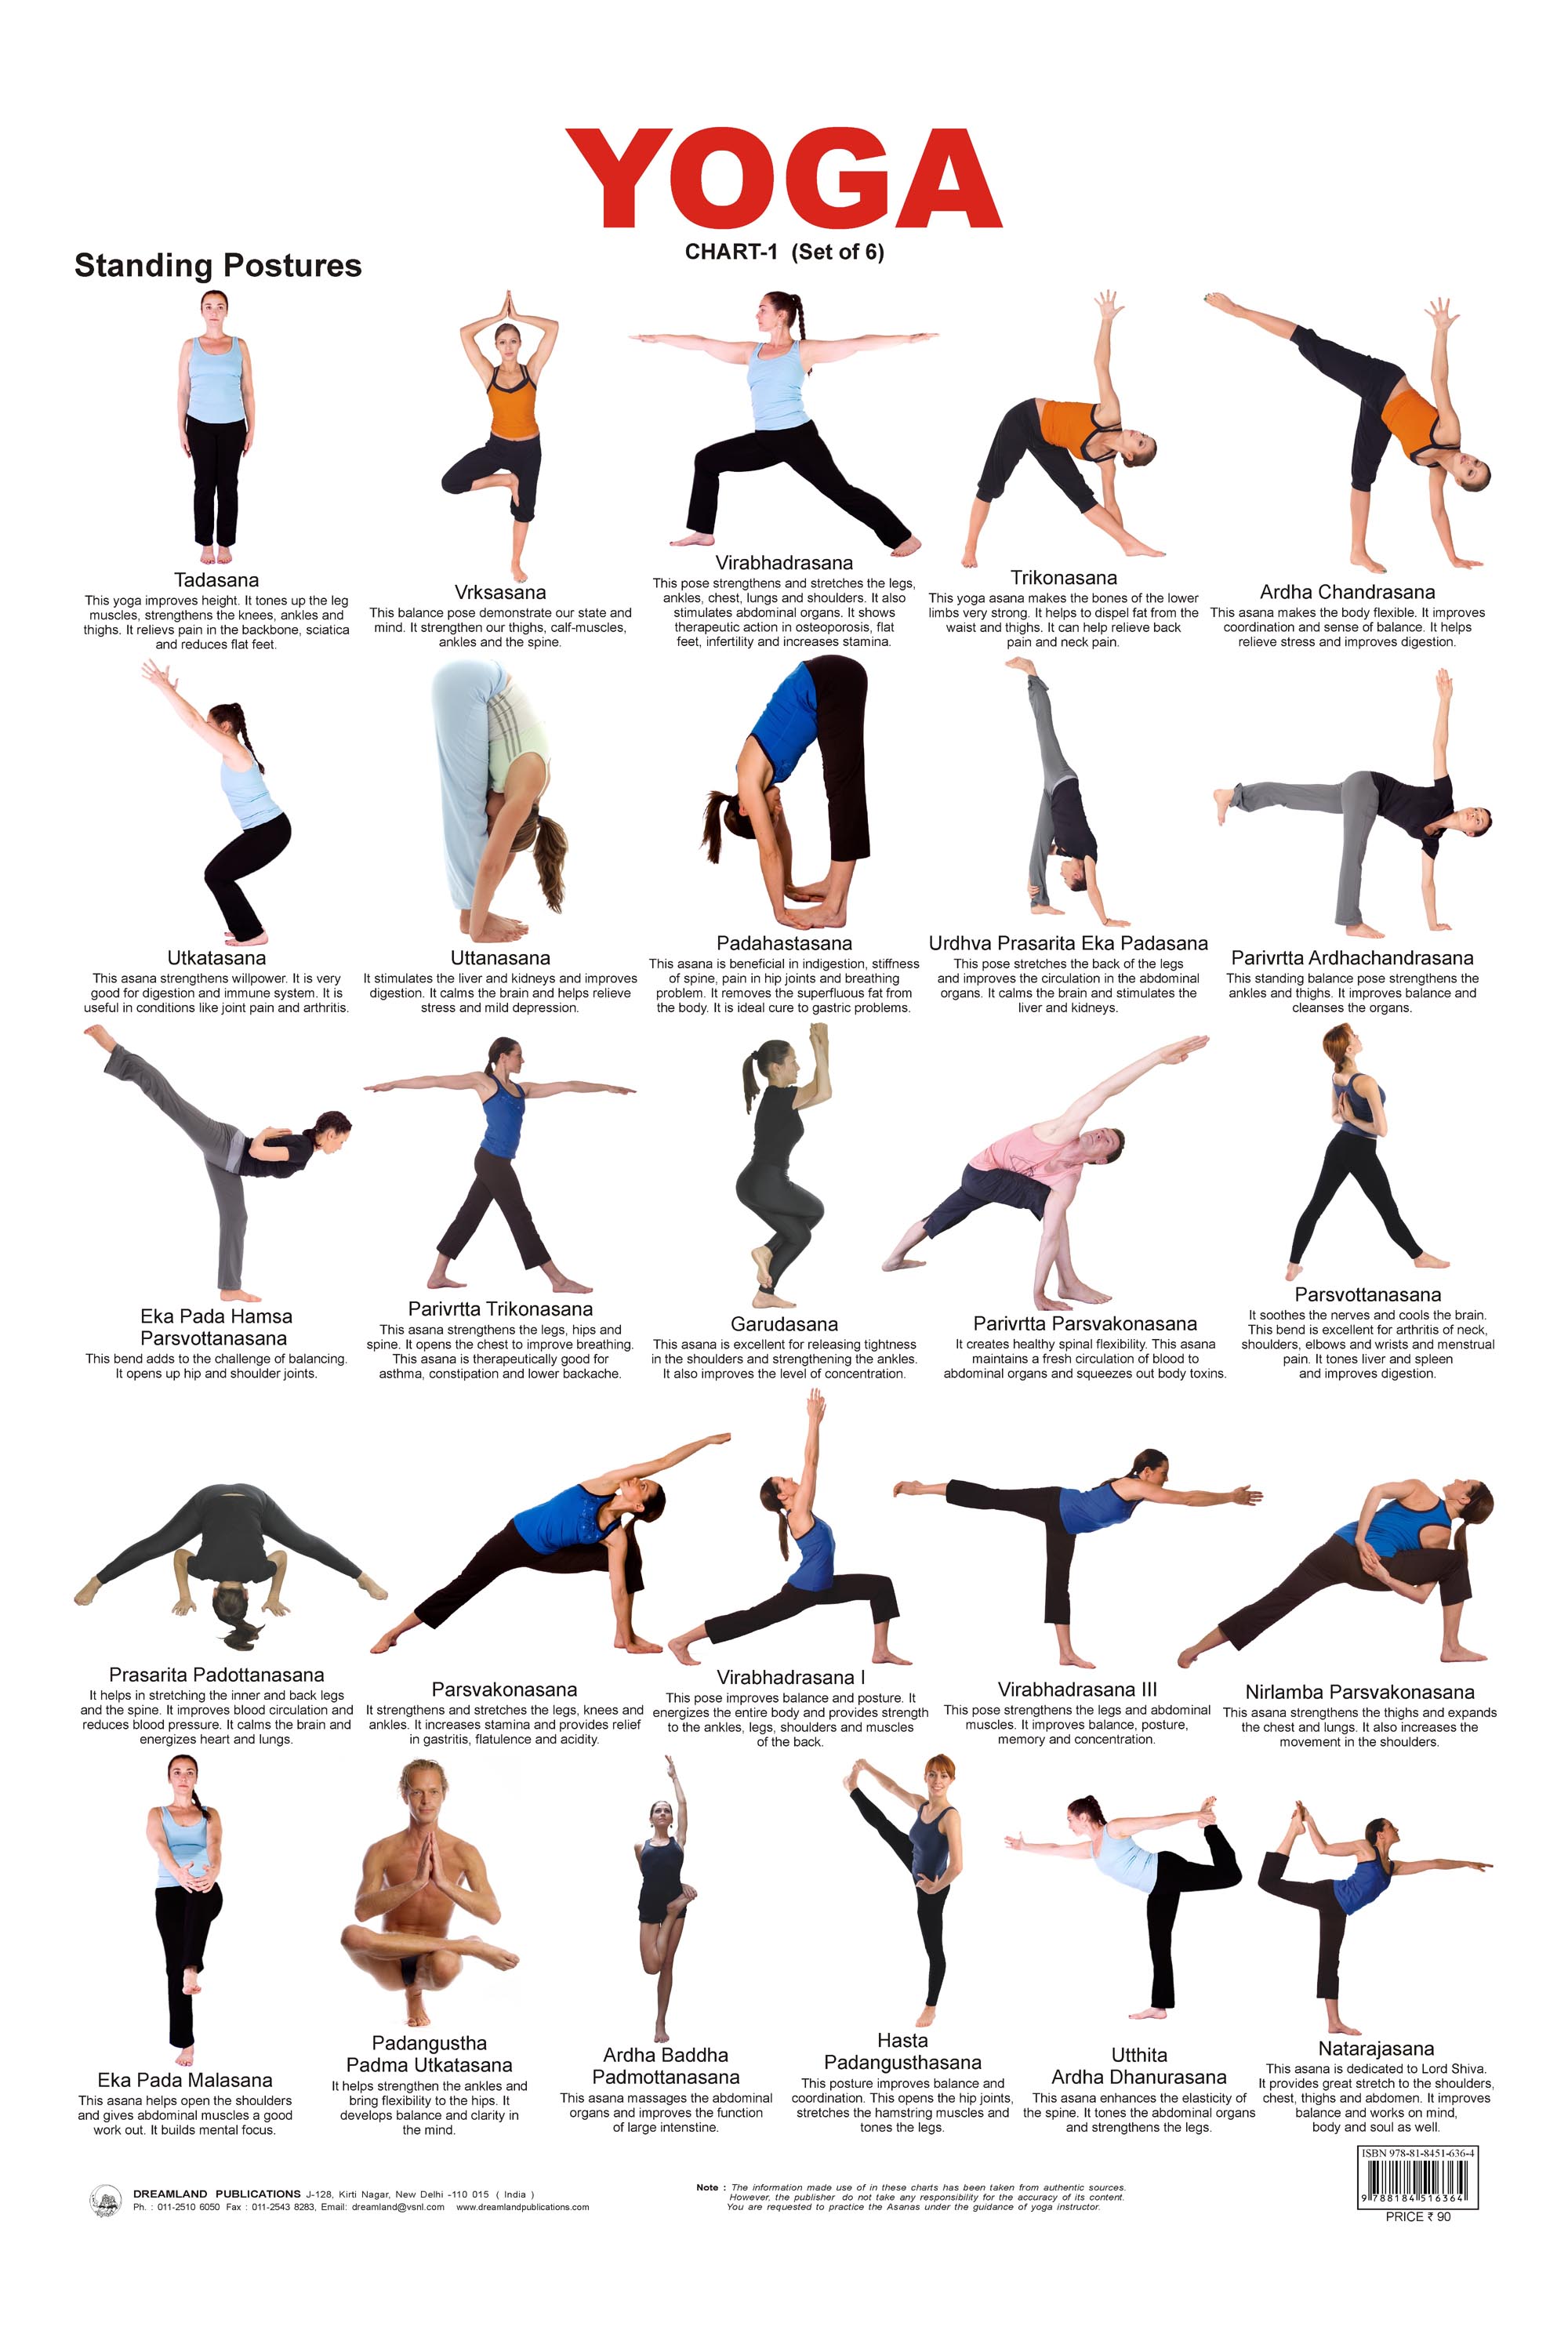 Yoga. of  poses There are names yoga different  Yoga many poses postures or schools hindi